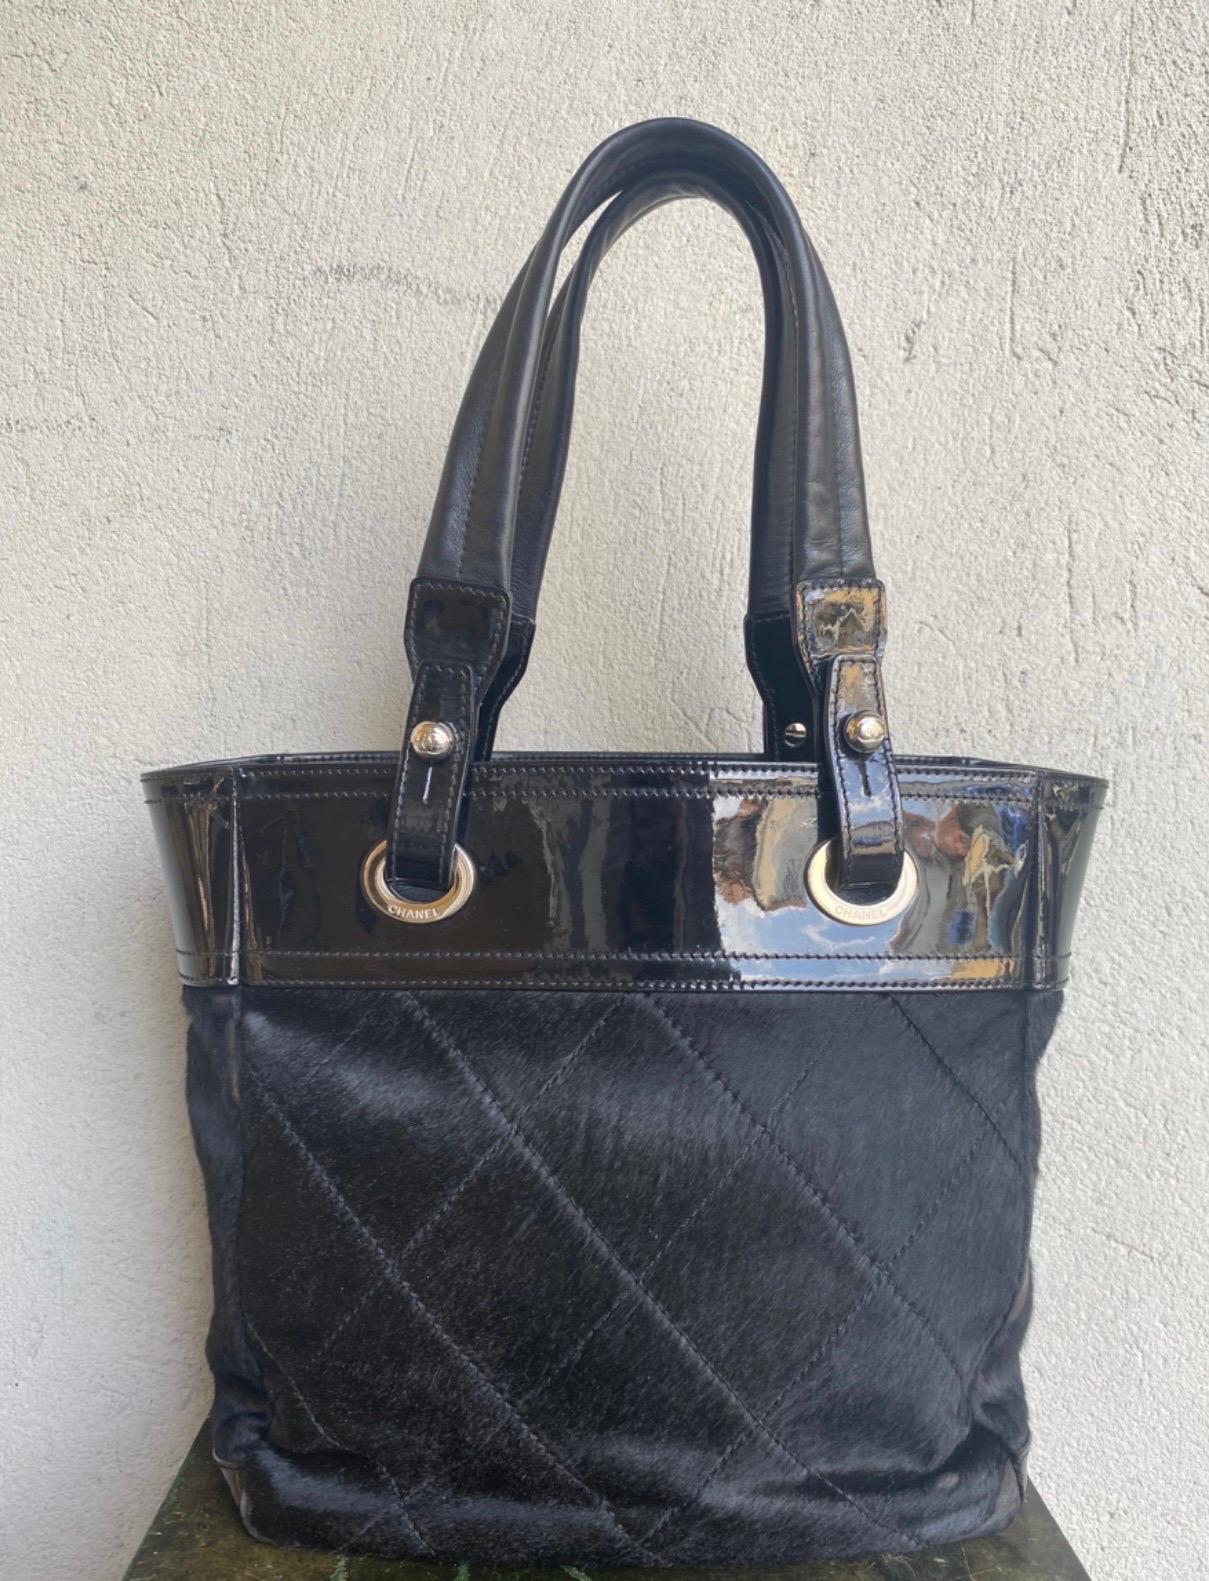 Chanel Shoulder bag in cavallino leather and parts in black leather/patent leather, with iconic CC charms on the front in silver-colored metal, the handles are in leather, the condition of the bag is good, it has been used, it has some spot where